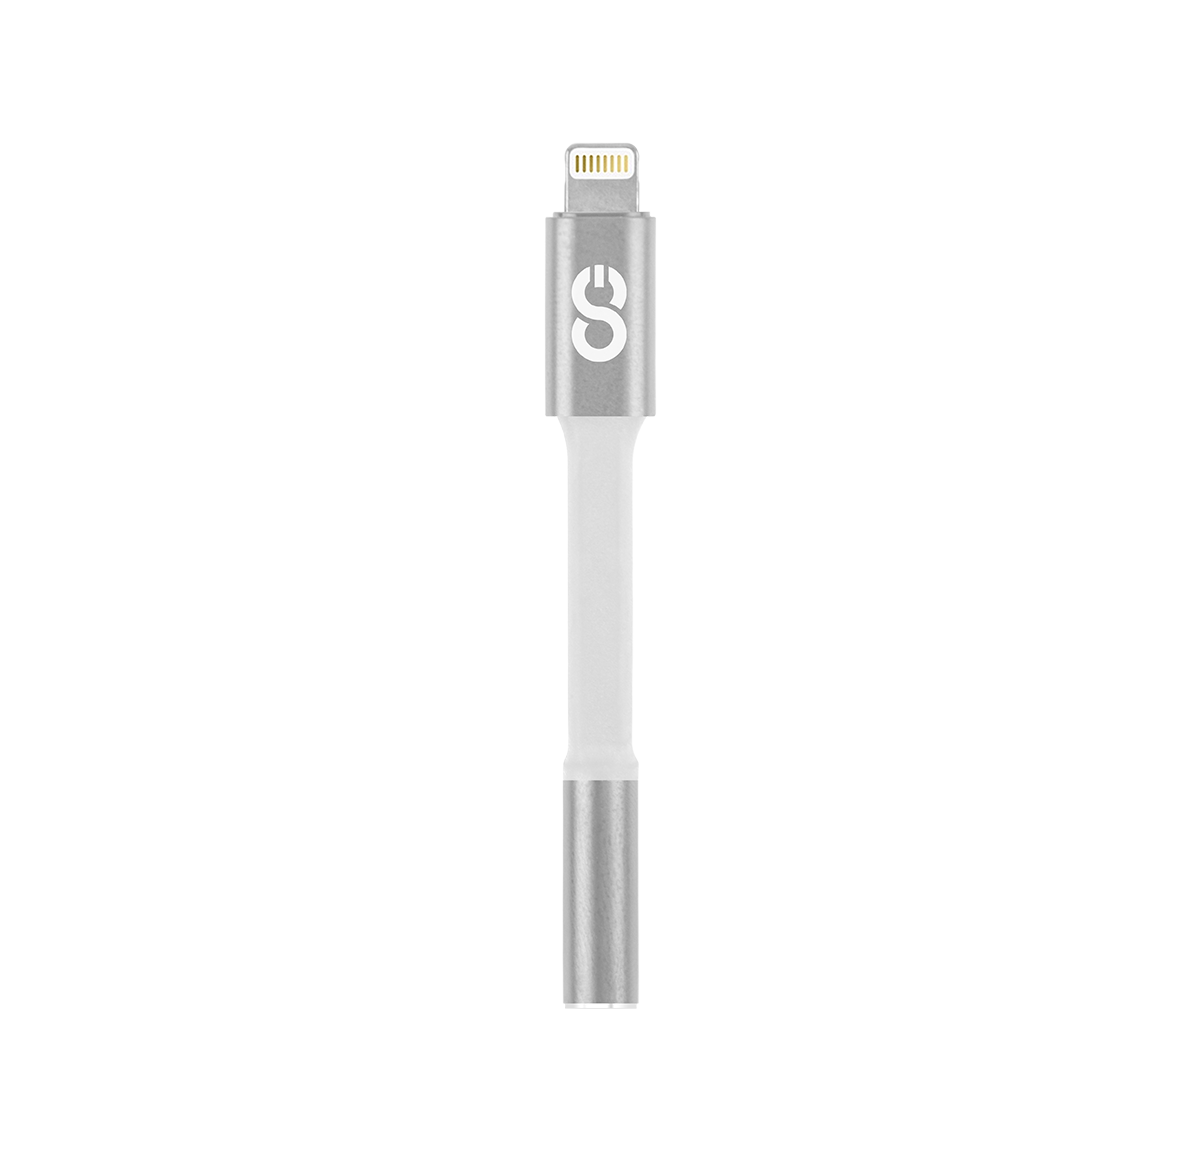 LOGii AUX Adapter for Lightning Devices